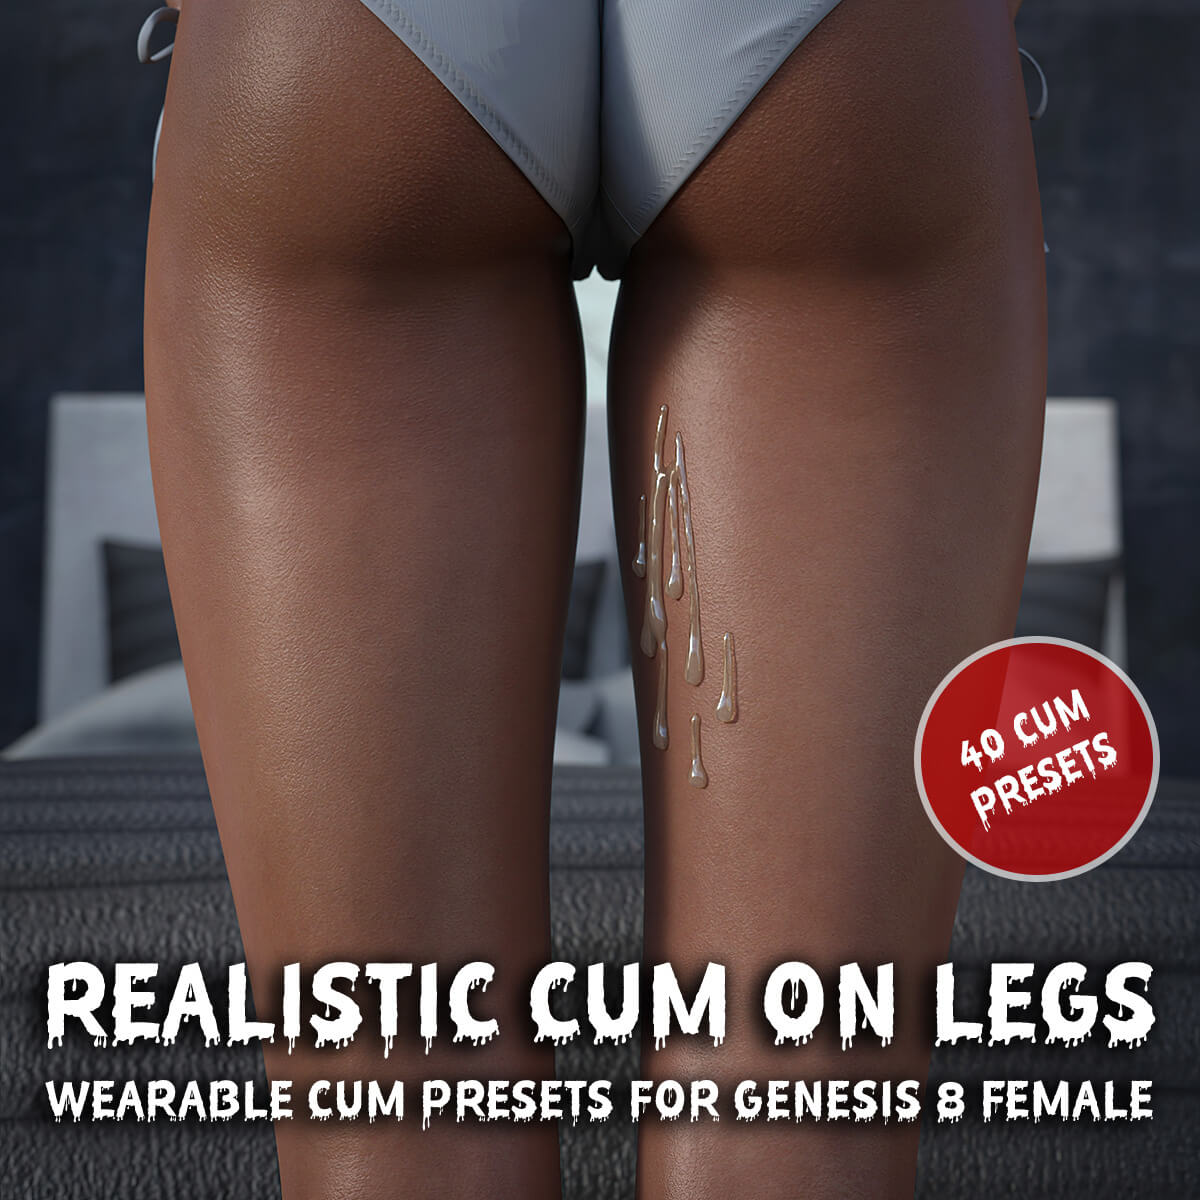 realistic cum on legs props for g8f 010e93f47463acd89f